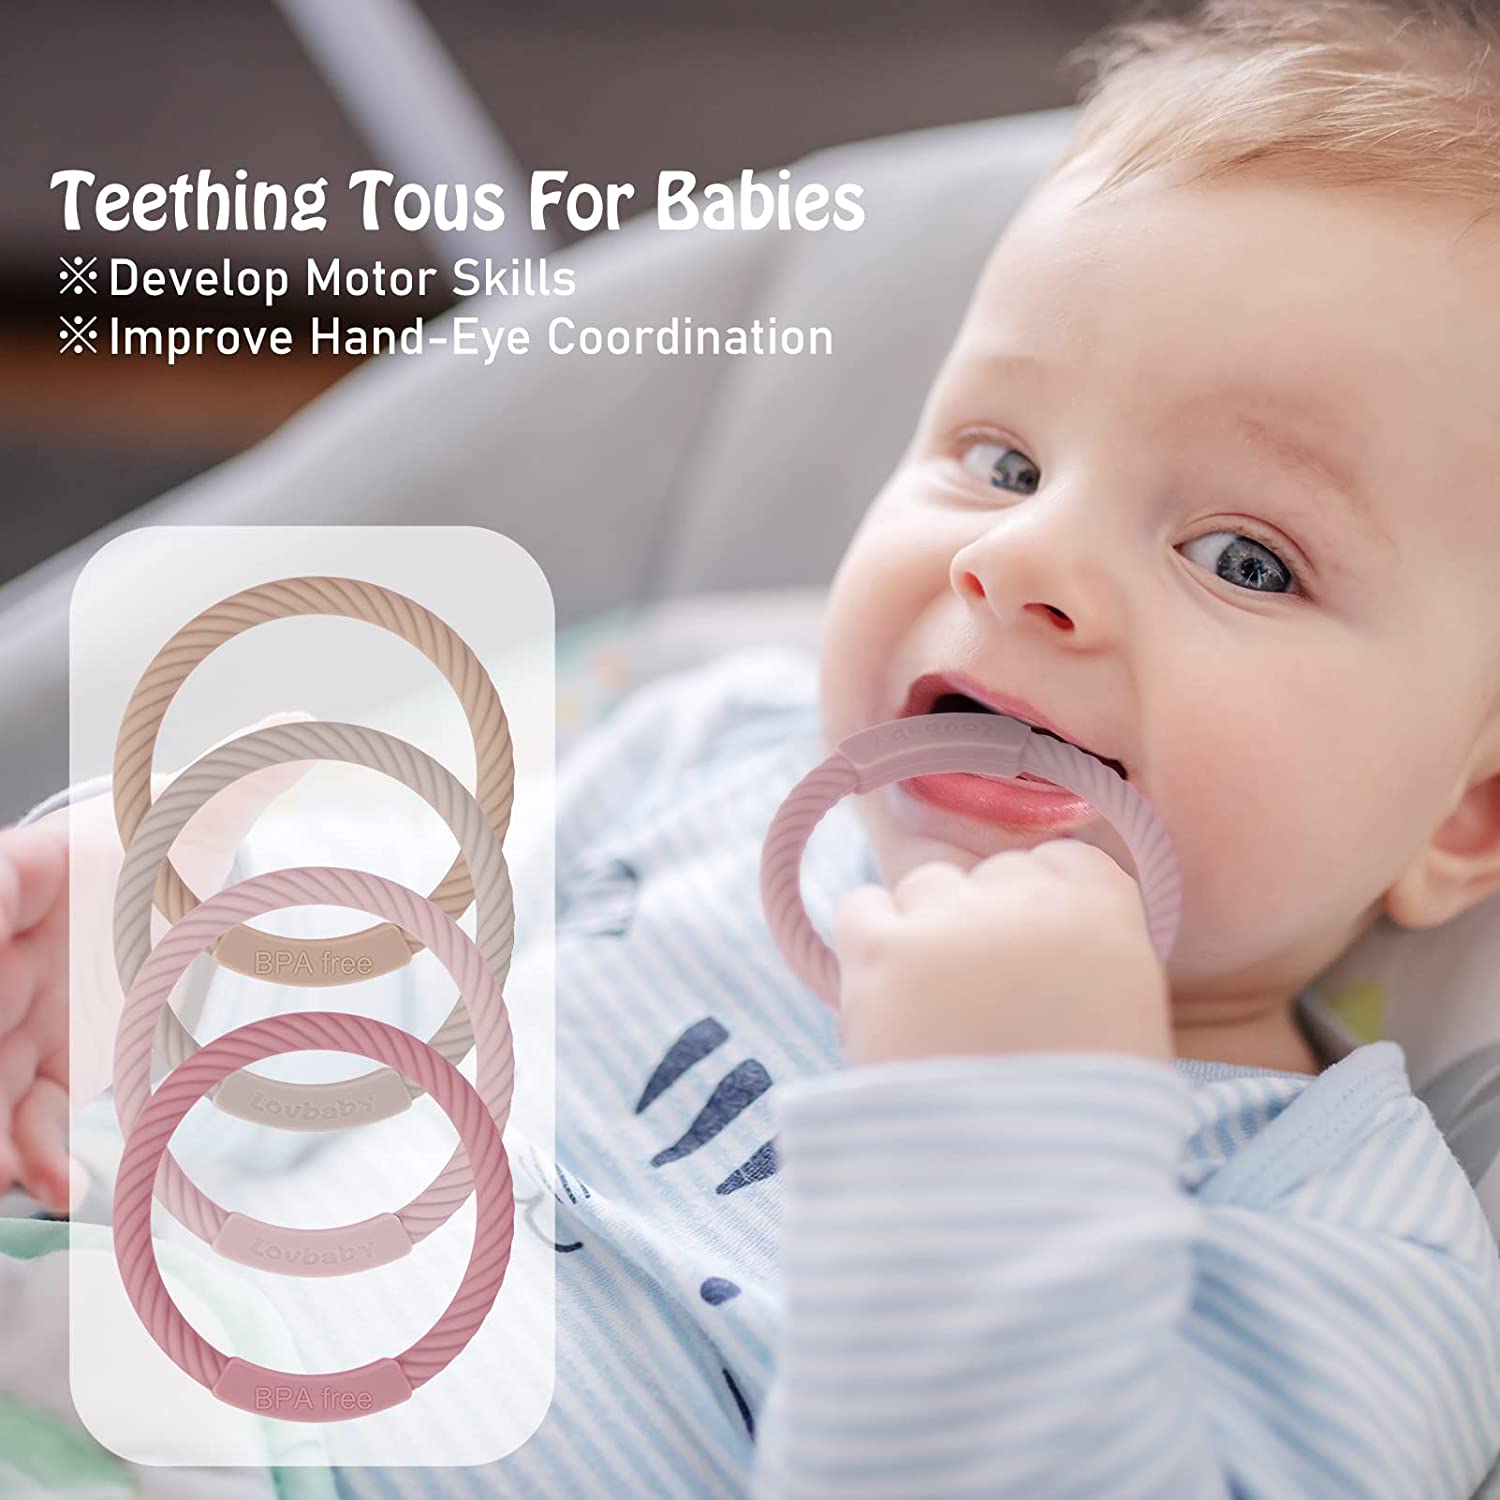 Buy Stacking Baby Teether Toy - Sensory Silicone Teething Rings for Babies  ? Promote Motor. Online at Low Prices in India - Amazon.in